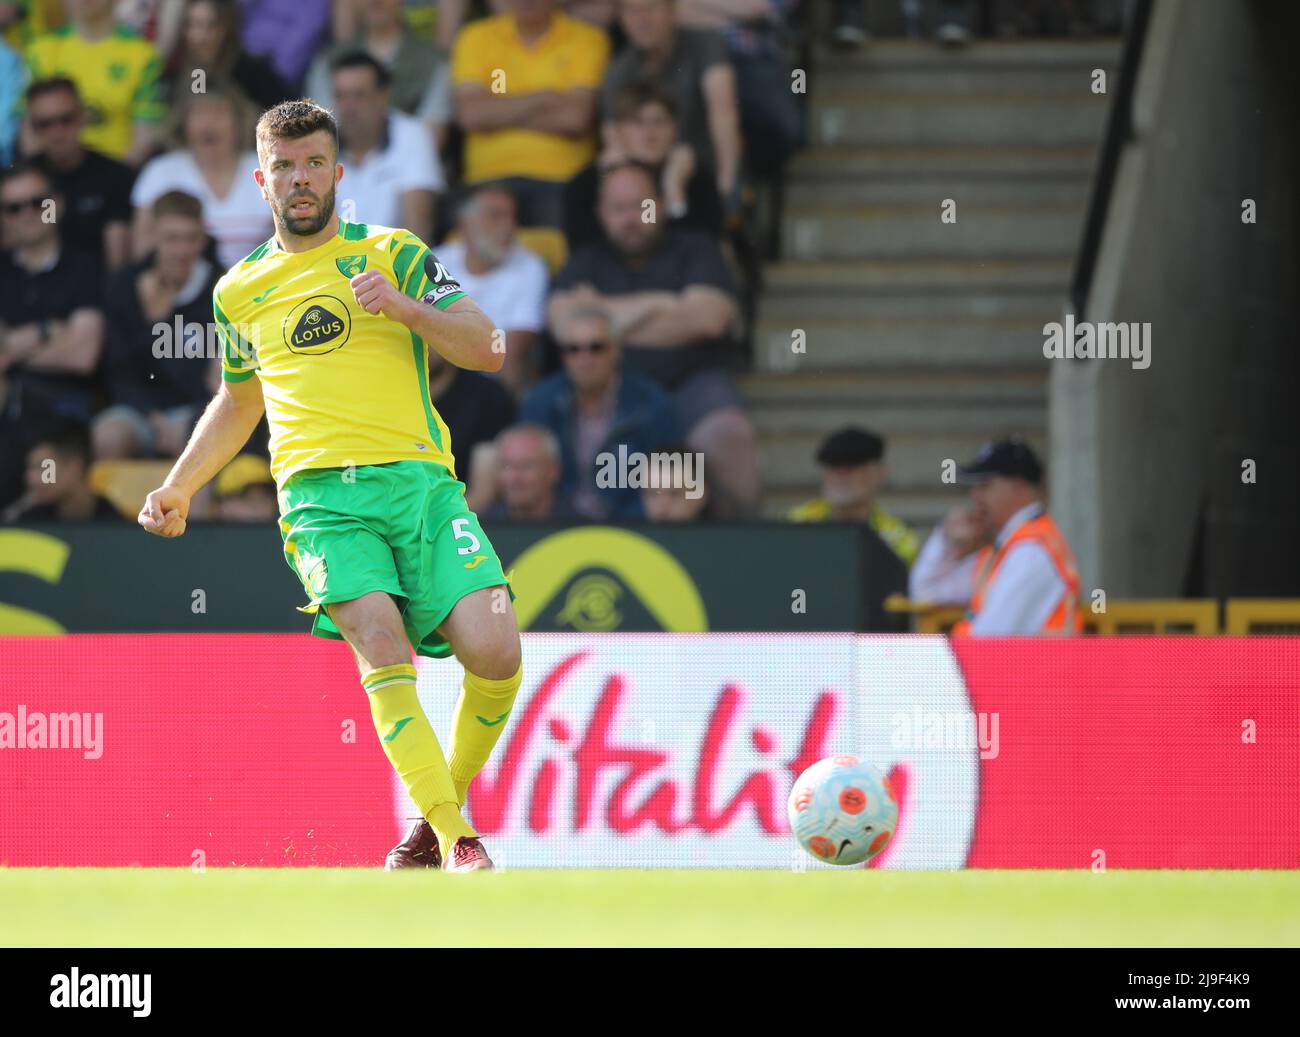 Norwich, UK. 22nd May, 2022. Grant Hanley (NC) at the Norwich City v Tottenham Hotspur, English Premier League match, at Carrow Road, Norwich. Credit: Paul Marriott/Alamy Live News Stock Photo